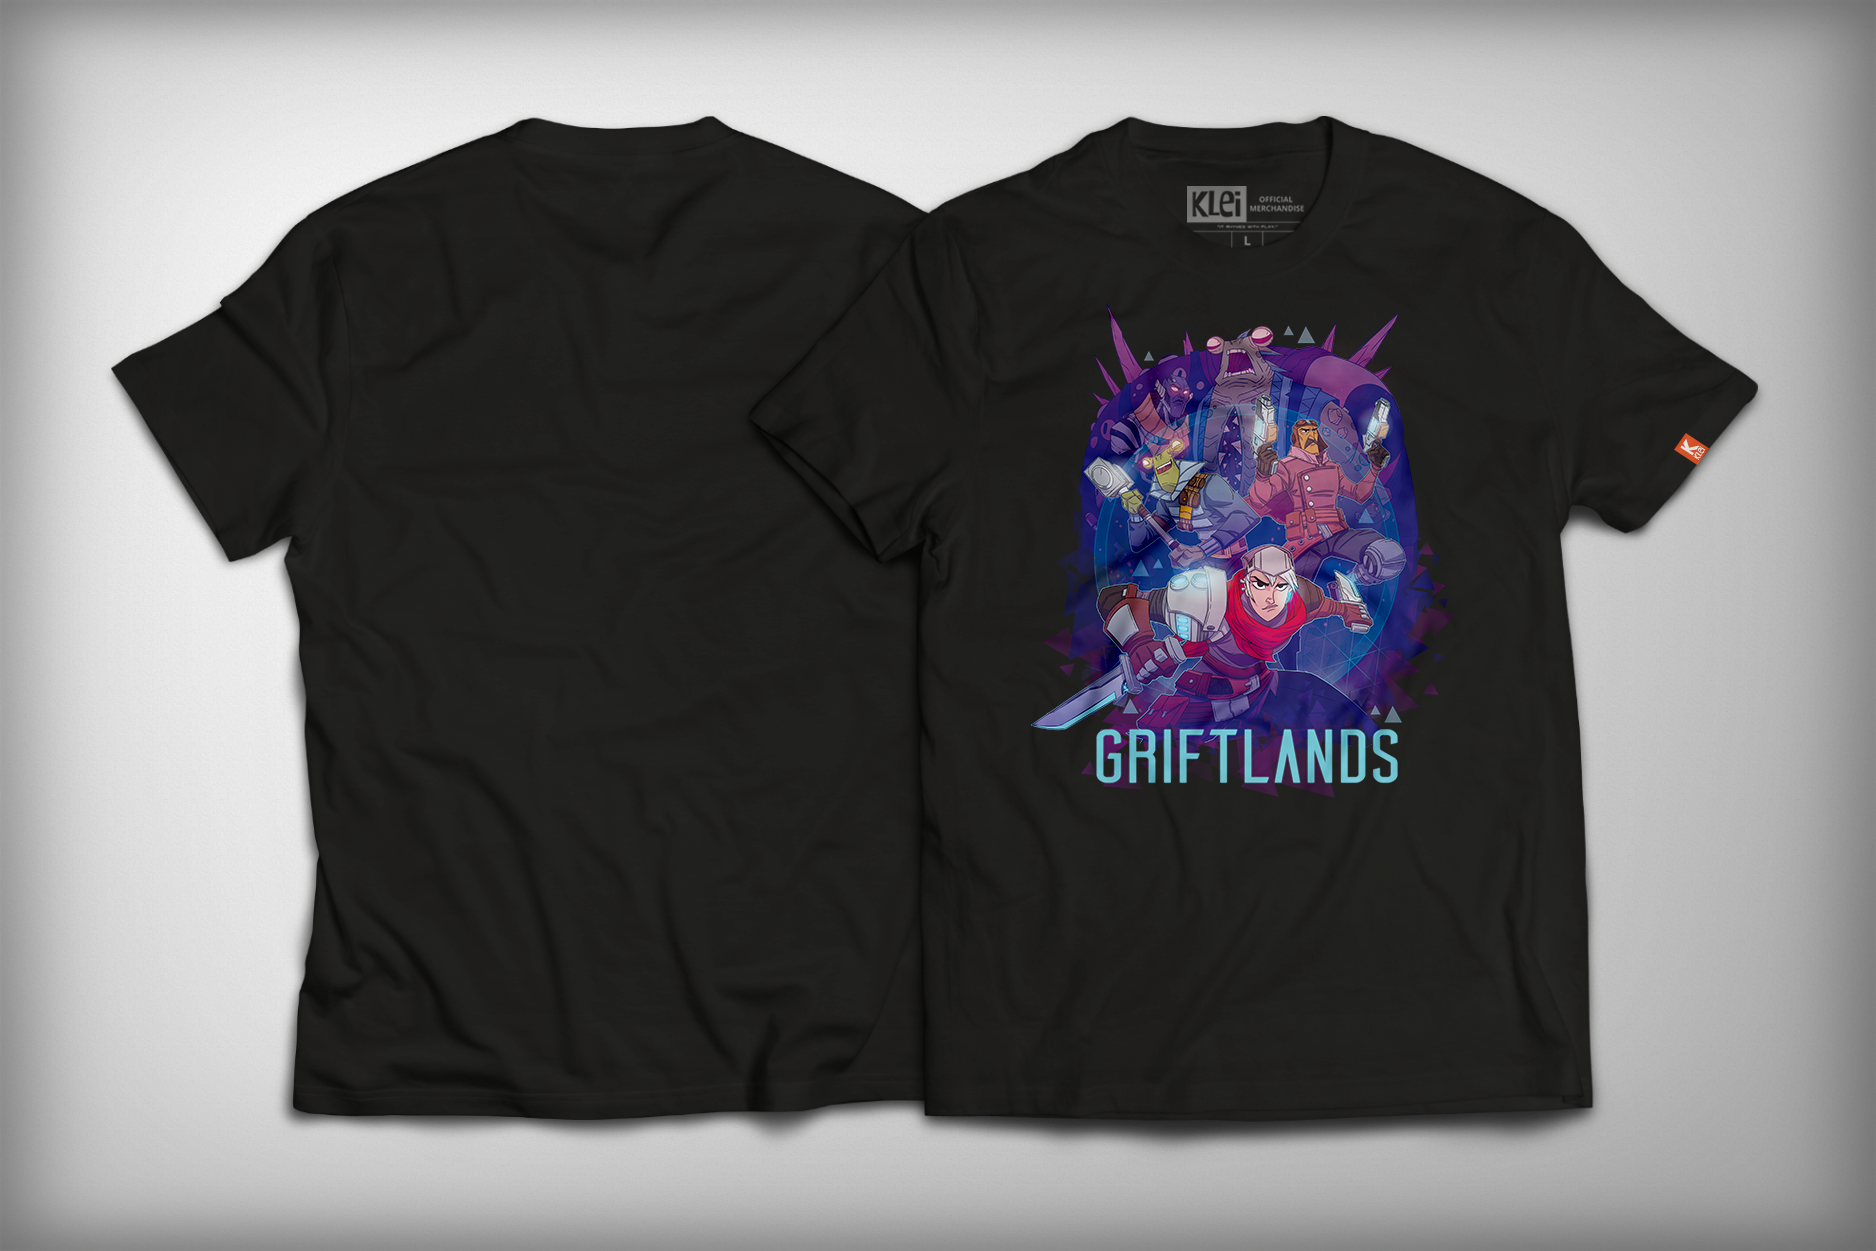 Griftlands shirt front and back featuring Sal, Smith and Rook